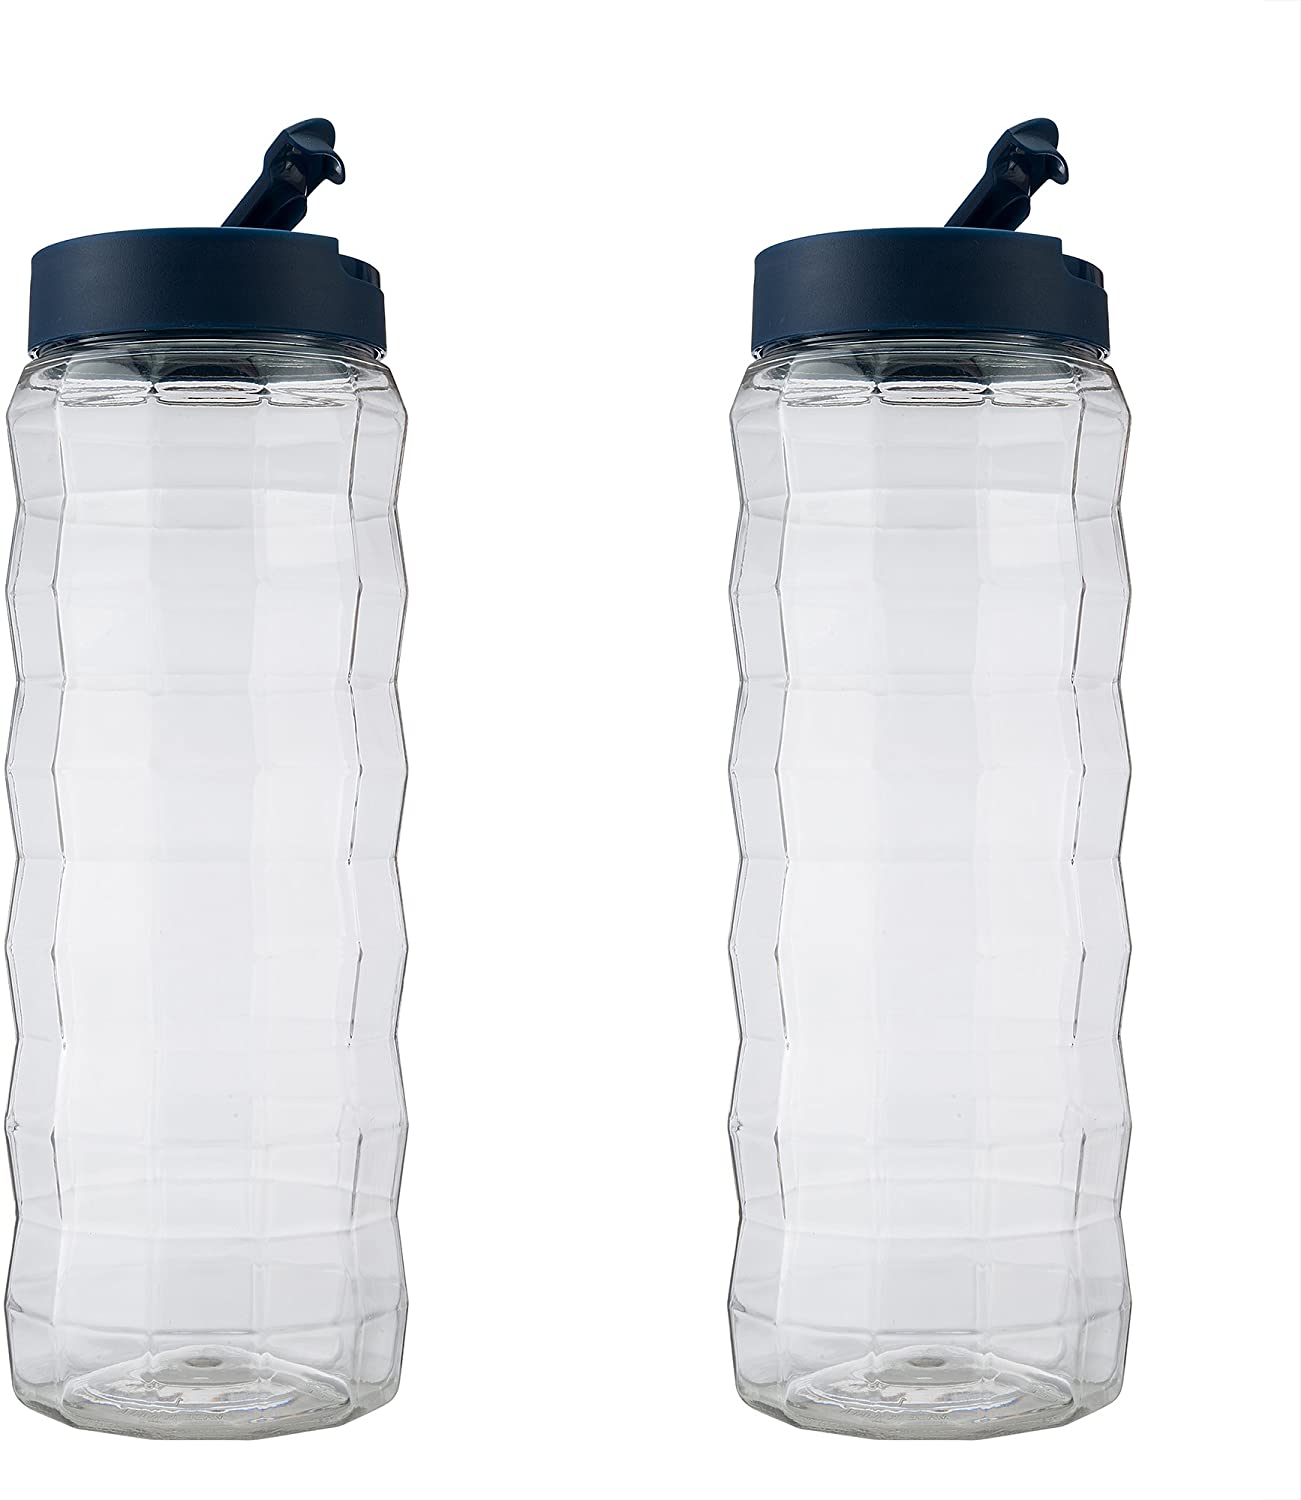 Komax Edge Beverage Bottle, 2 L - Whole and All